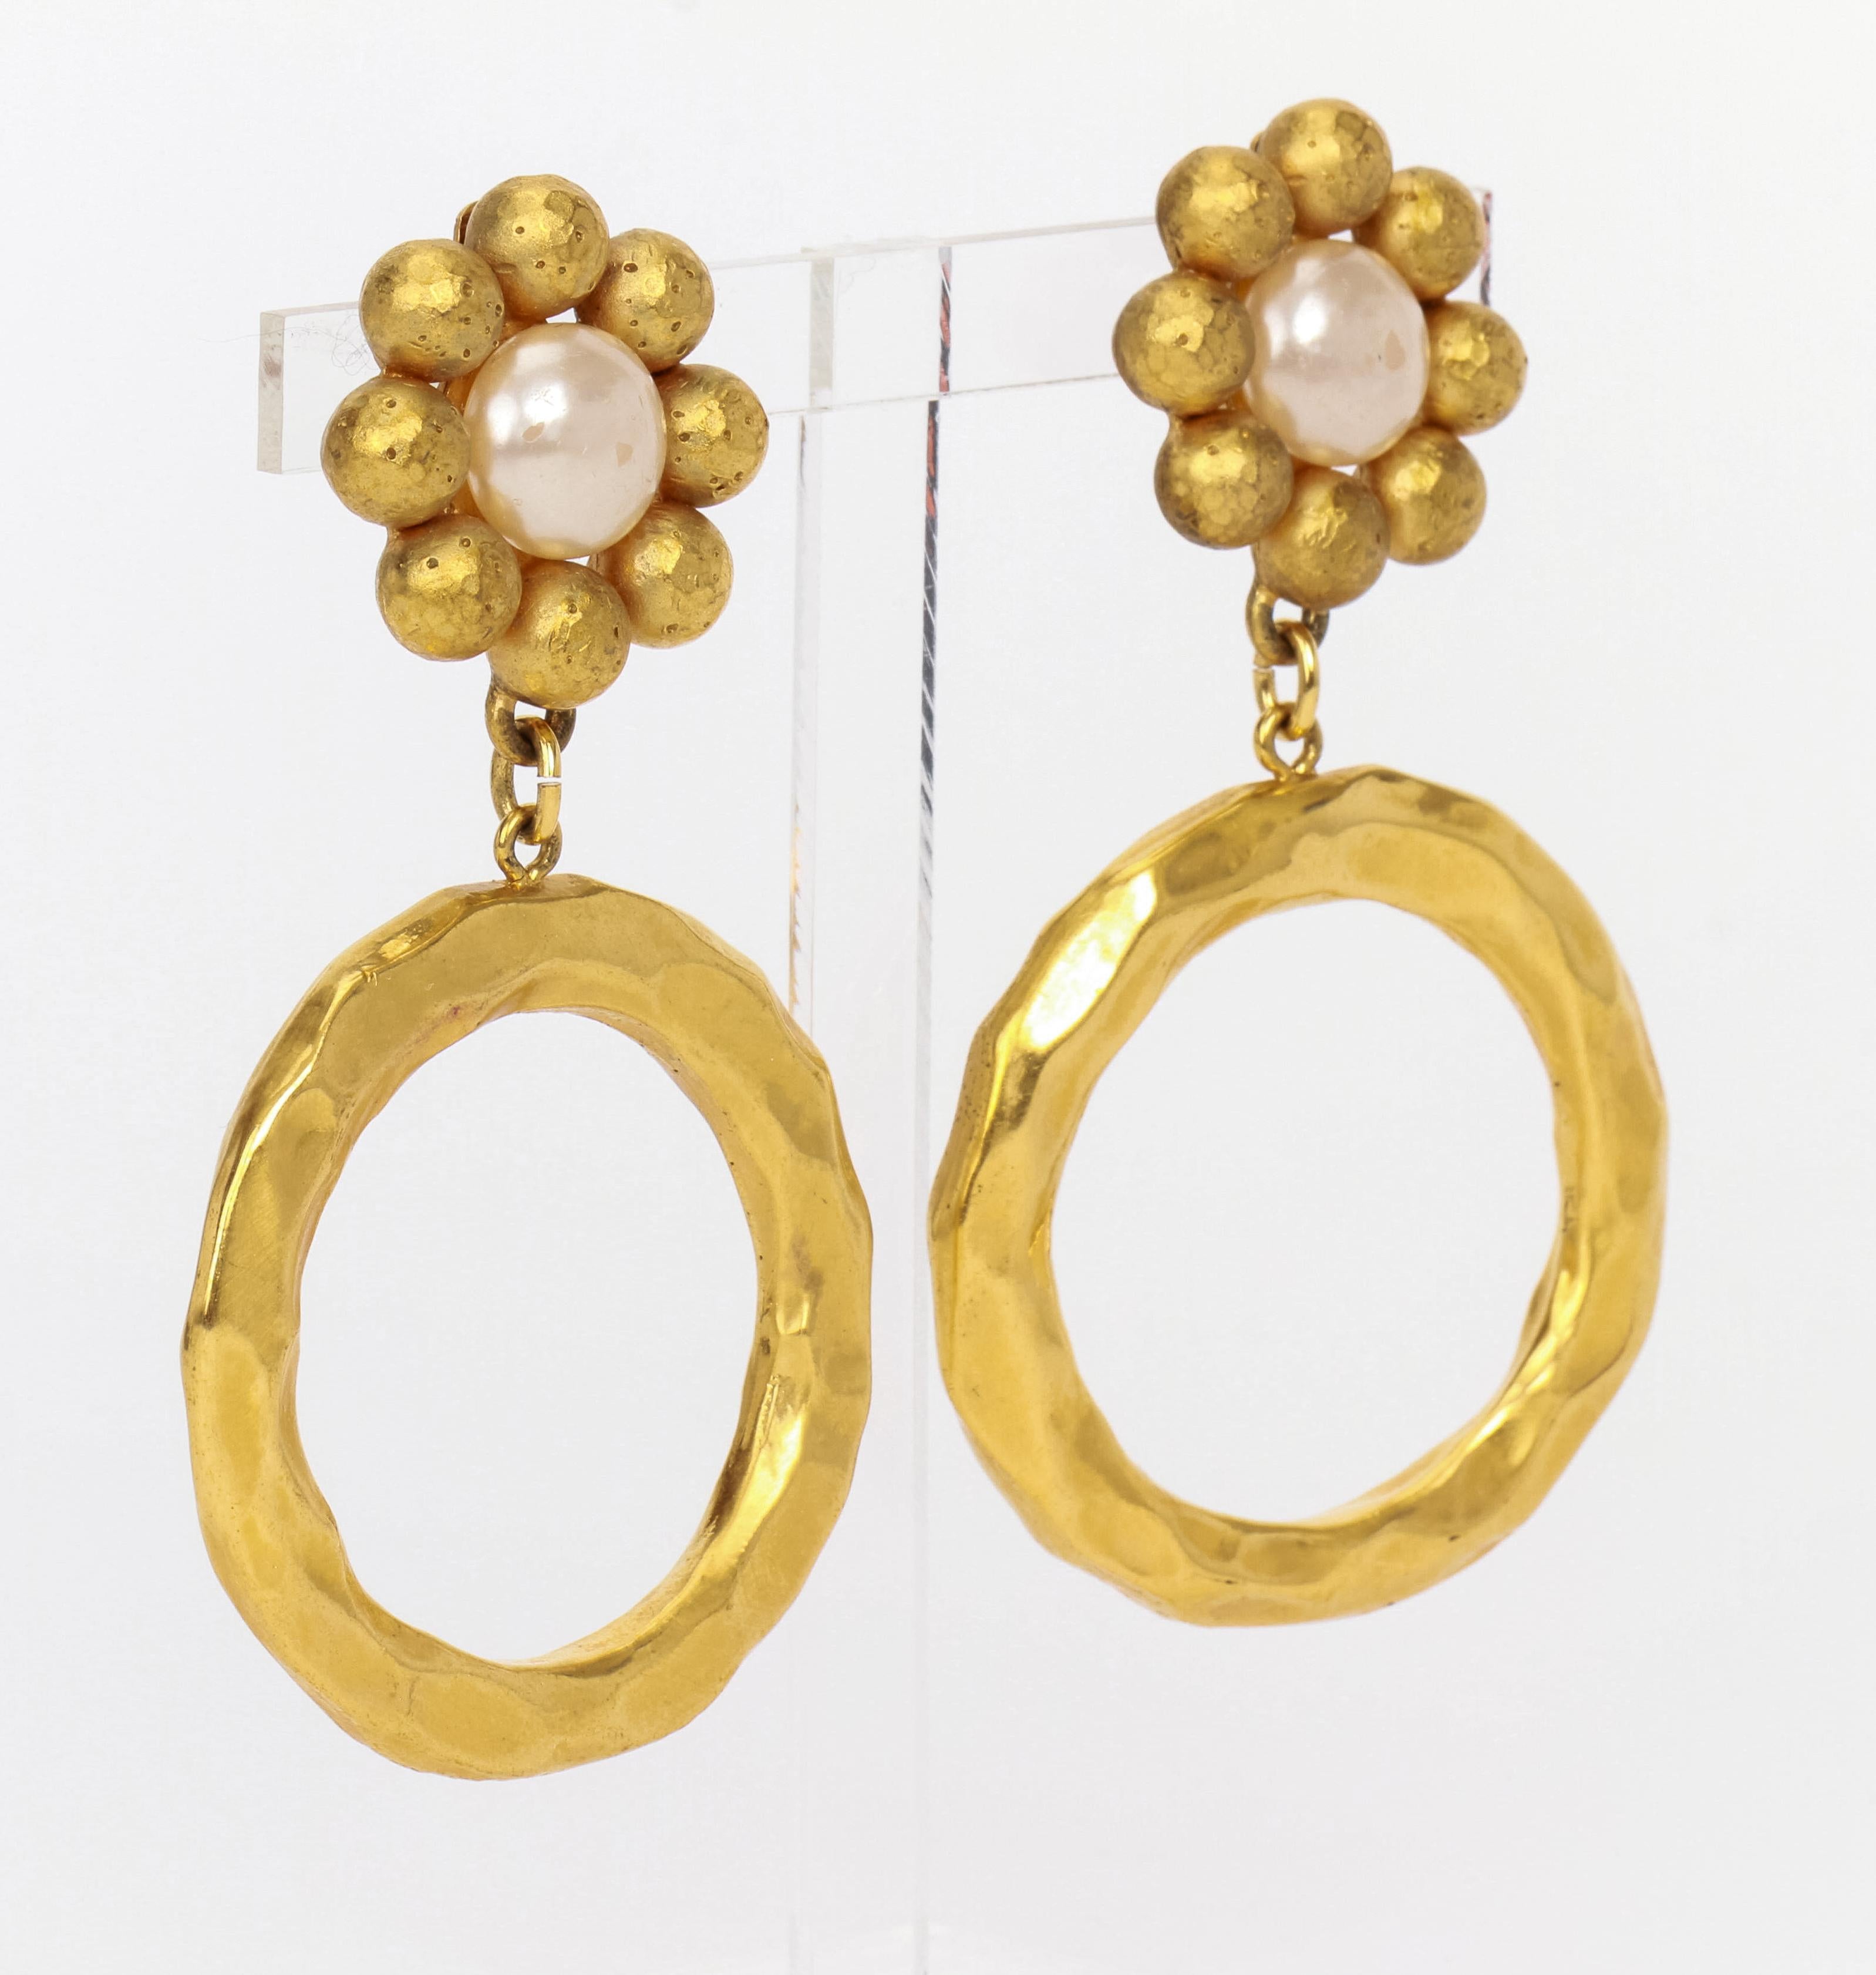 Chanel large ear clip earrings  with 2.25